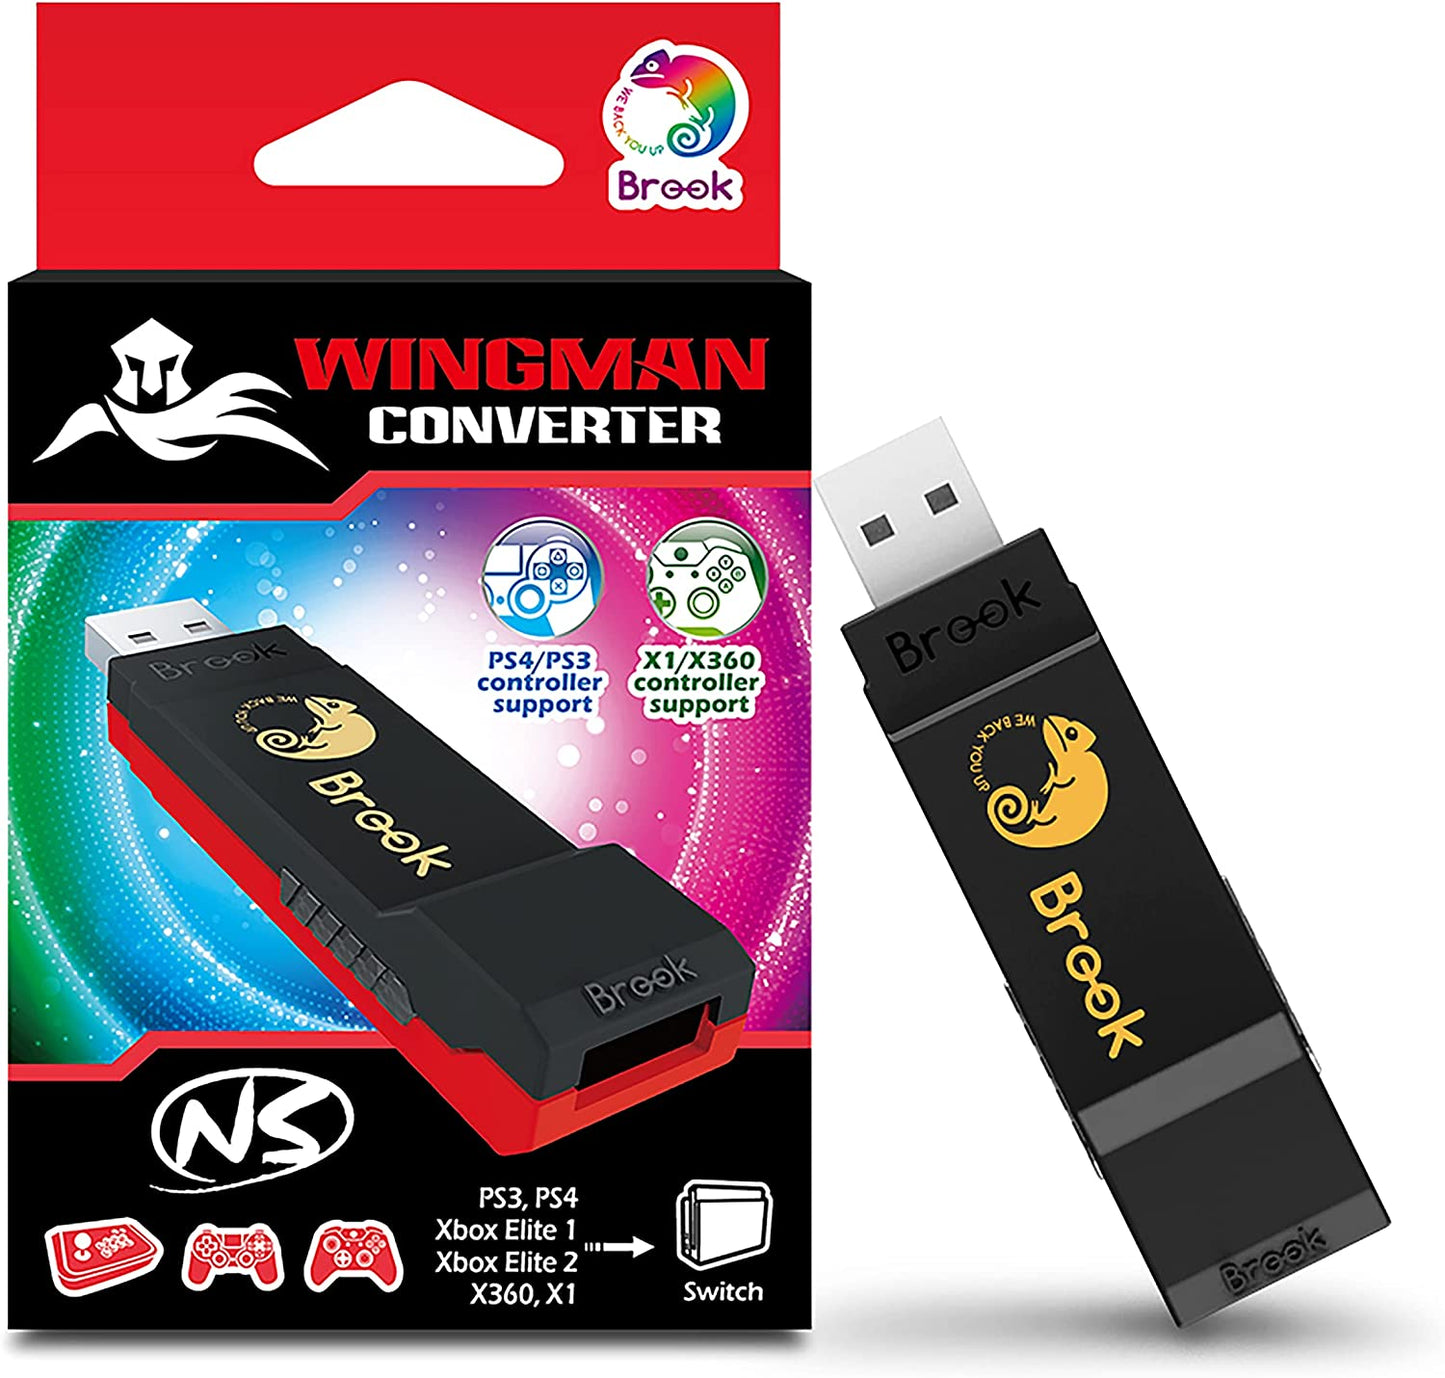 Brook Wingman NS Converter- Support Xbox Series X/S/One/360, PS5/PS4/PS3, Xbox Elite 1/2, Switch Pro Controllers on Switch and PC(X-Input) Console